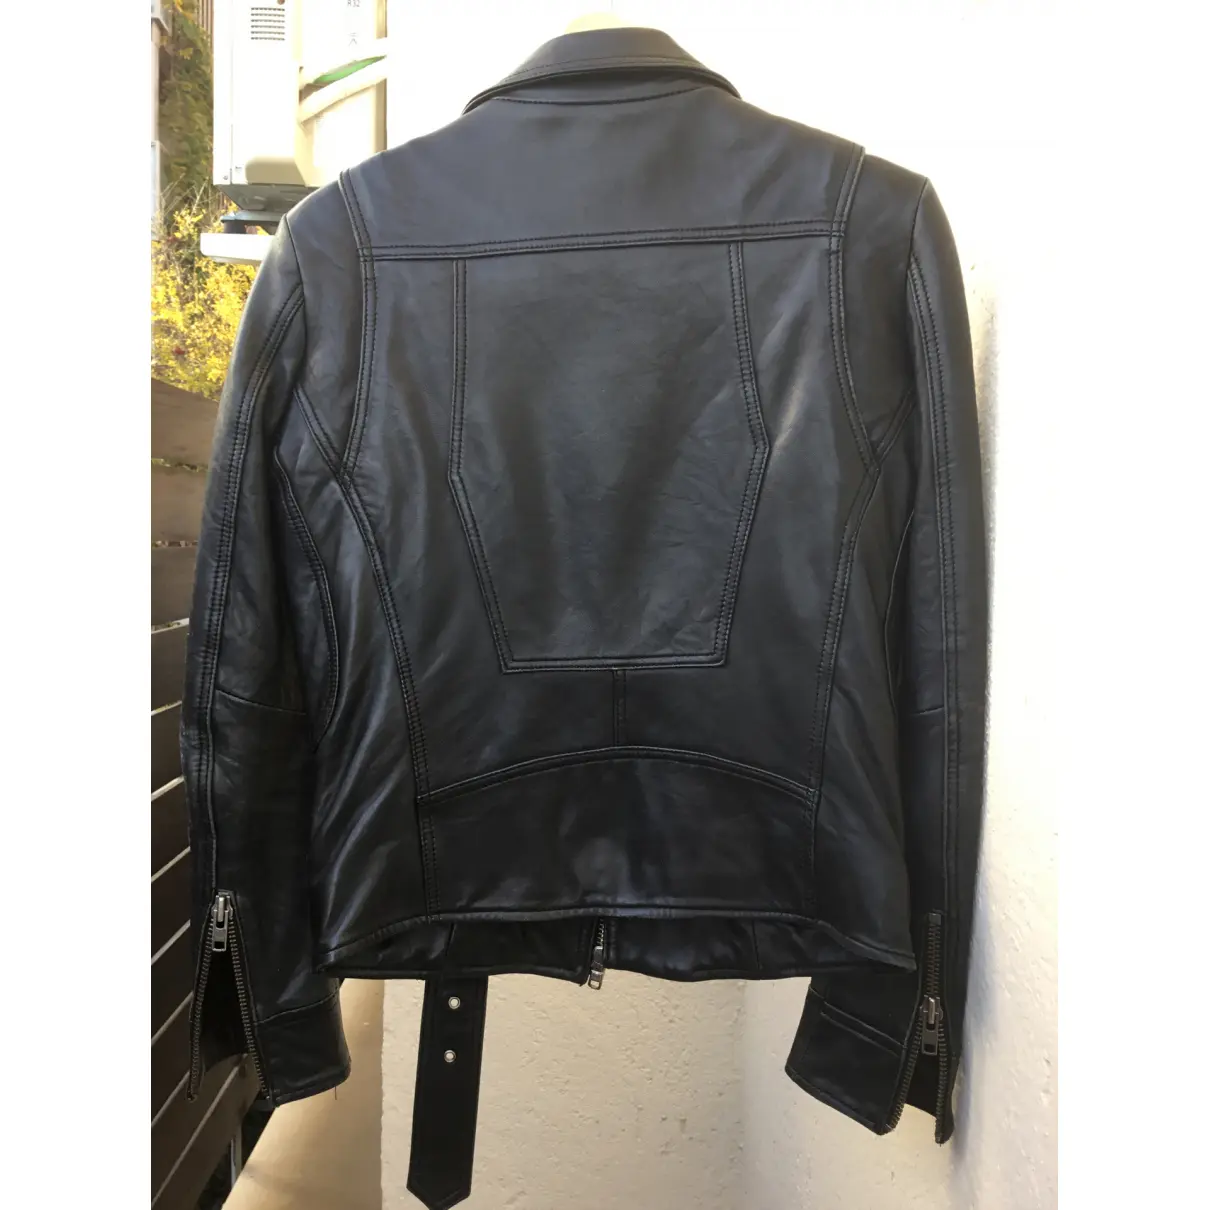 Buy Surface To Air Leather jacket online